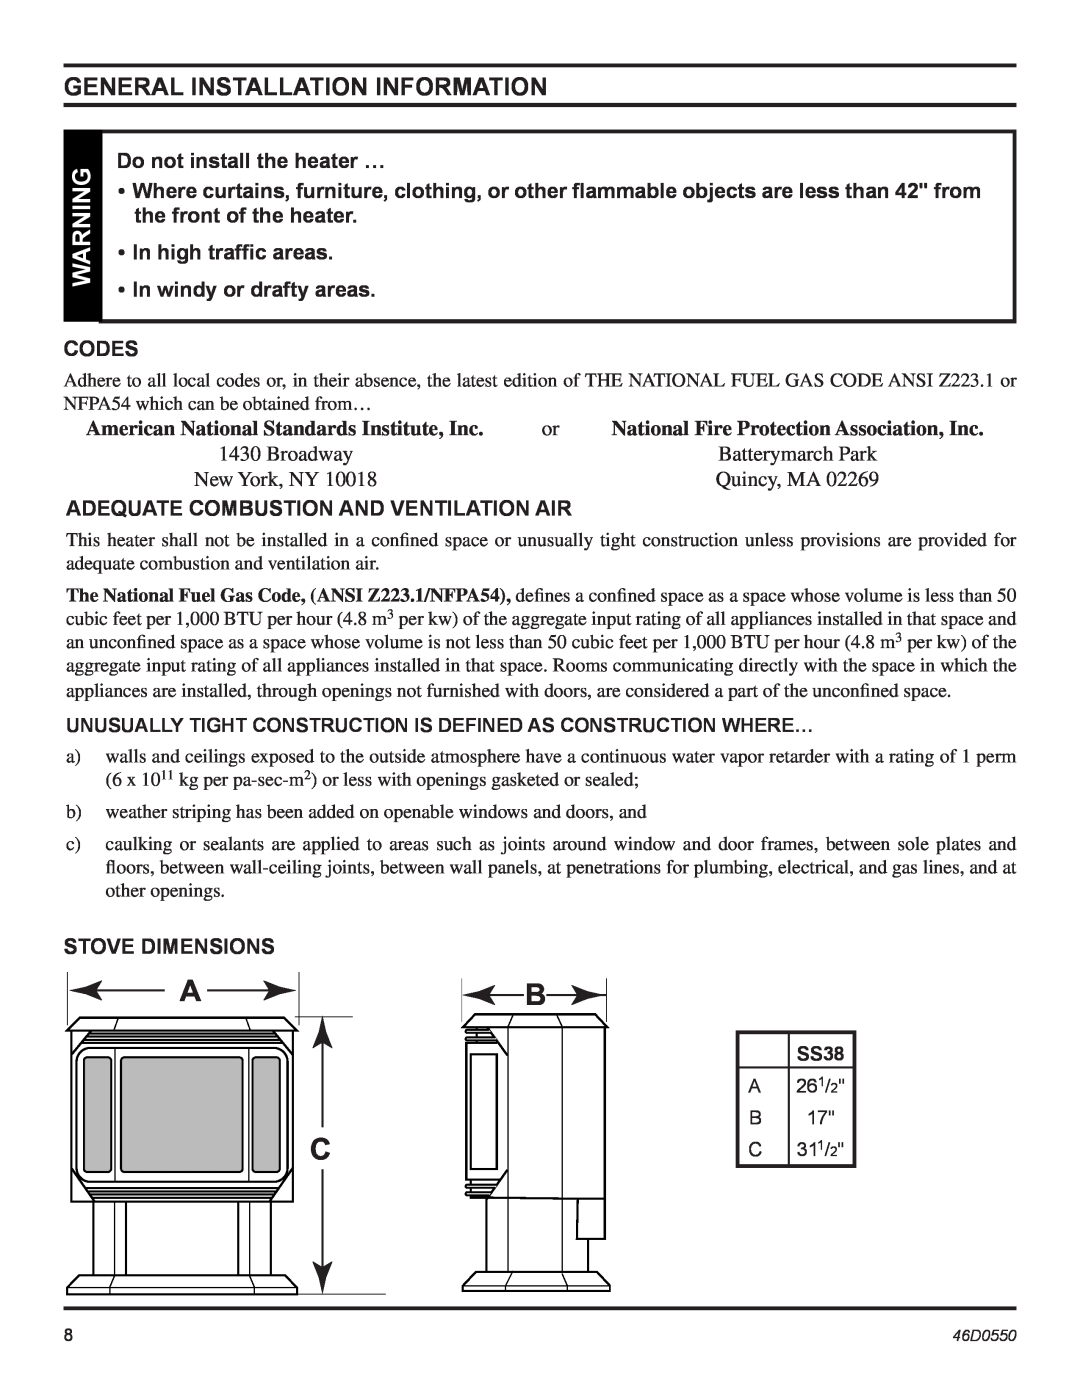 Monessen Hearth DSSNVMB General Installation Information, Do not install the heater …, Codes, Stove Dimensions, SS38 